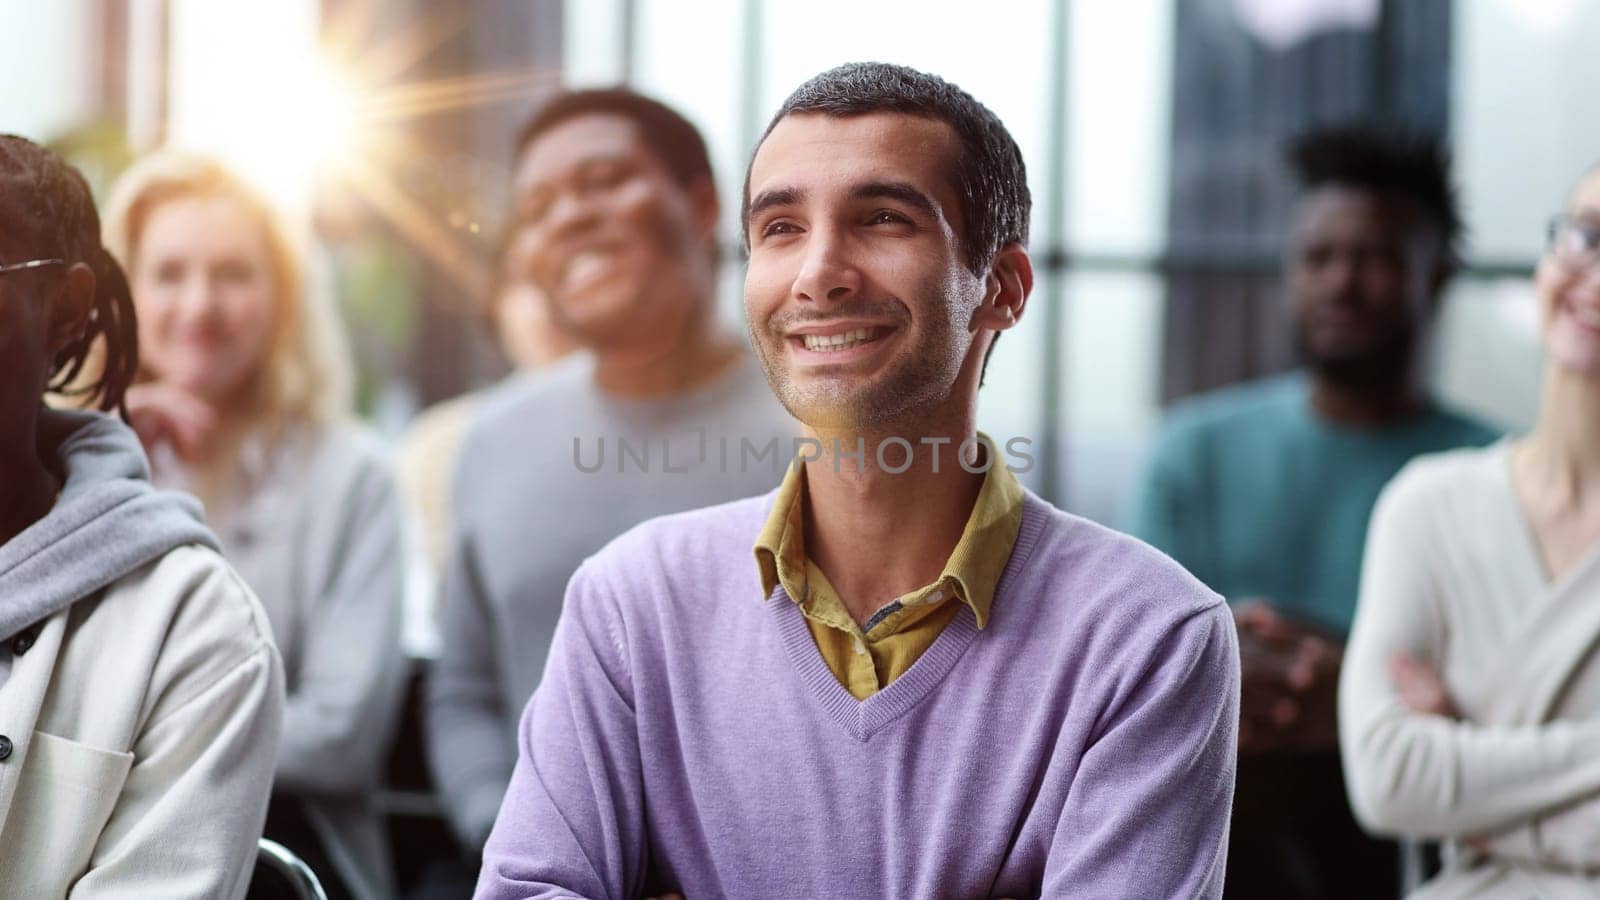 Group of happy interested business people listening to a colleague during a meeting